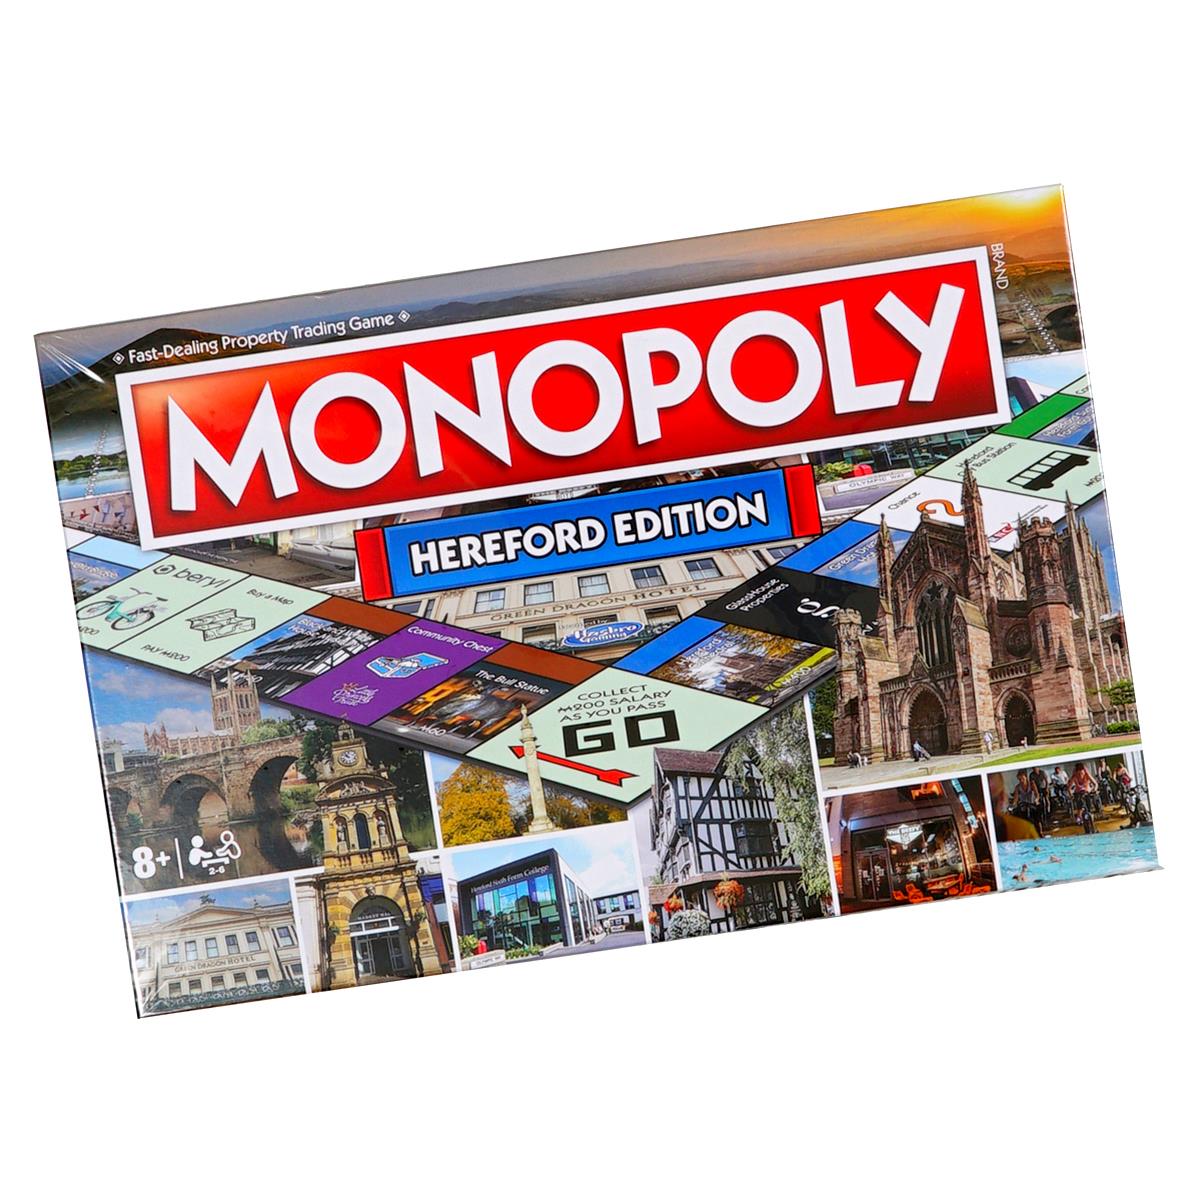 Which football team featured in the Hereford Monopoly board game?